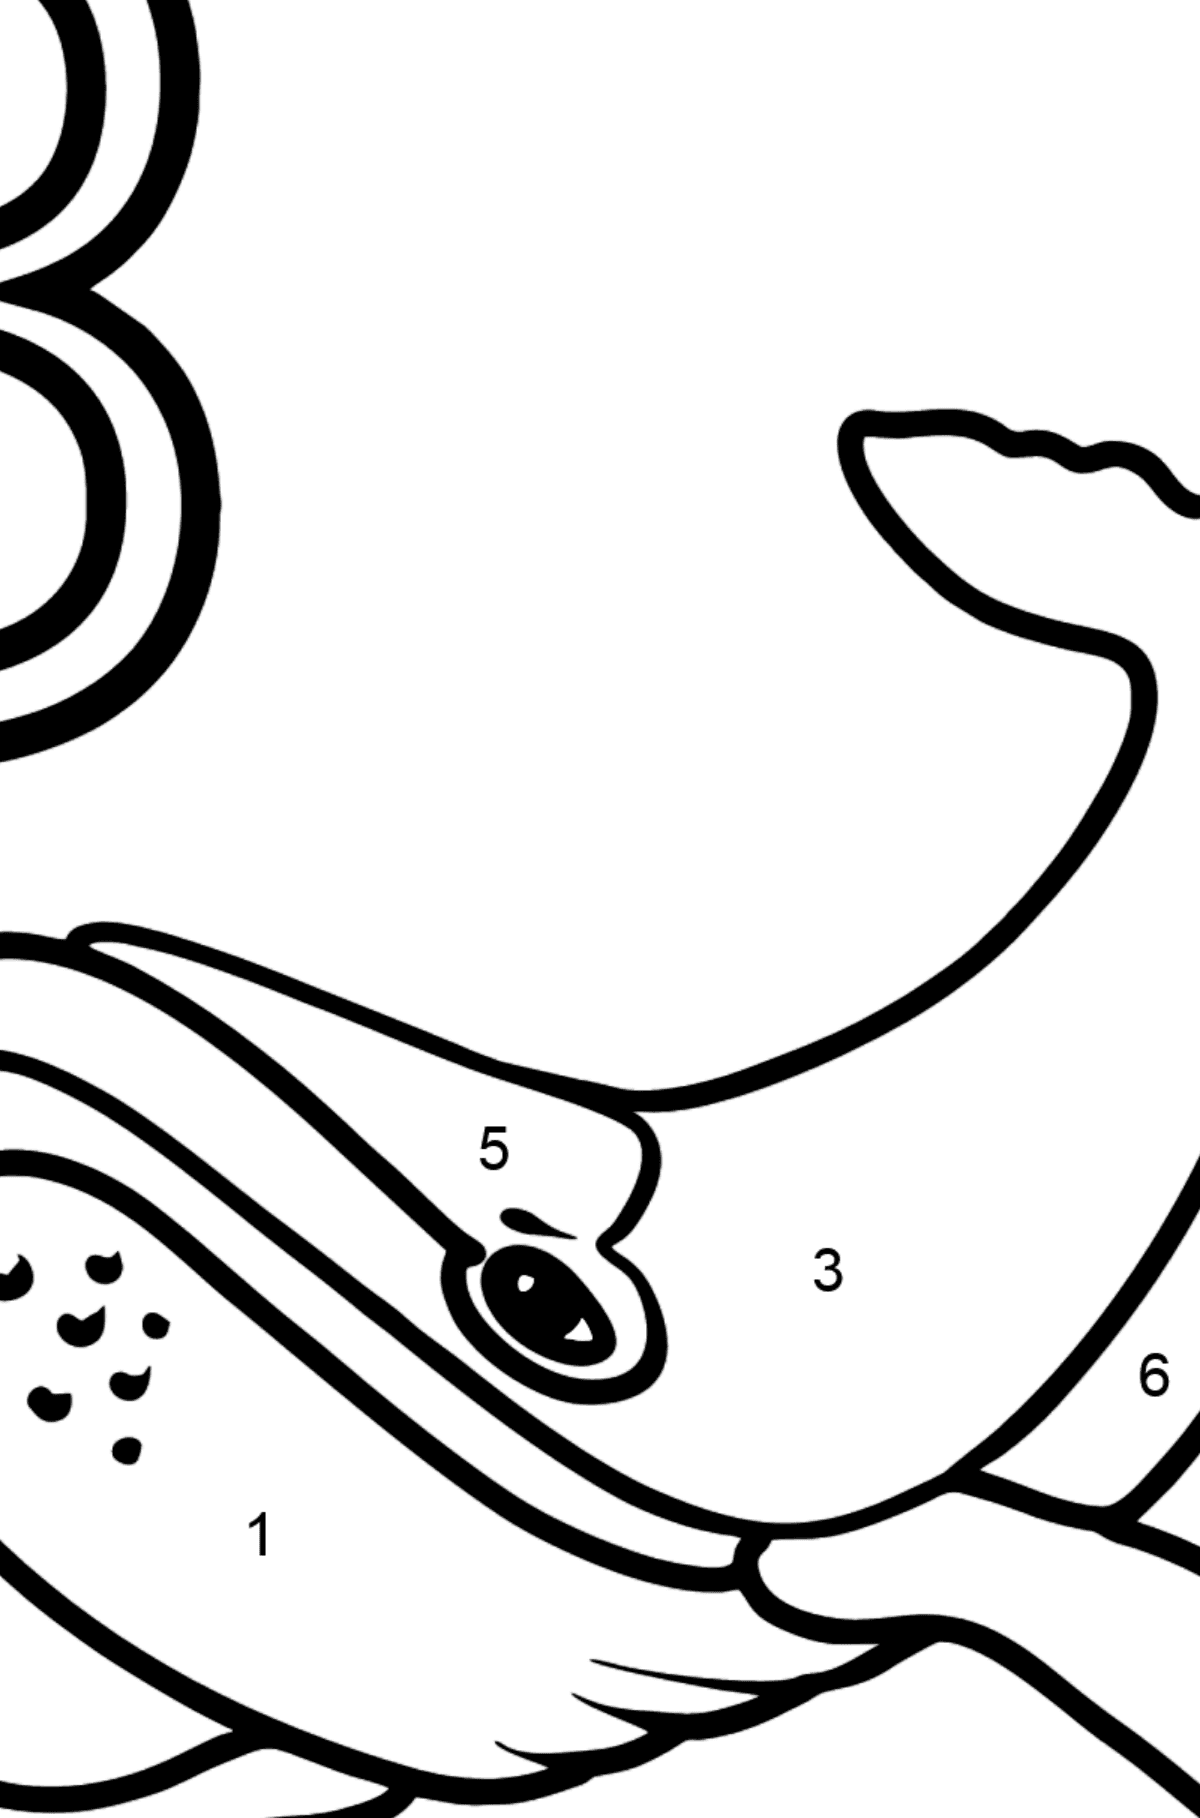 Spanish Letter B coloring pages - BALLENA - Coloring by Numbers for Kids